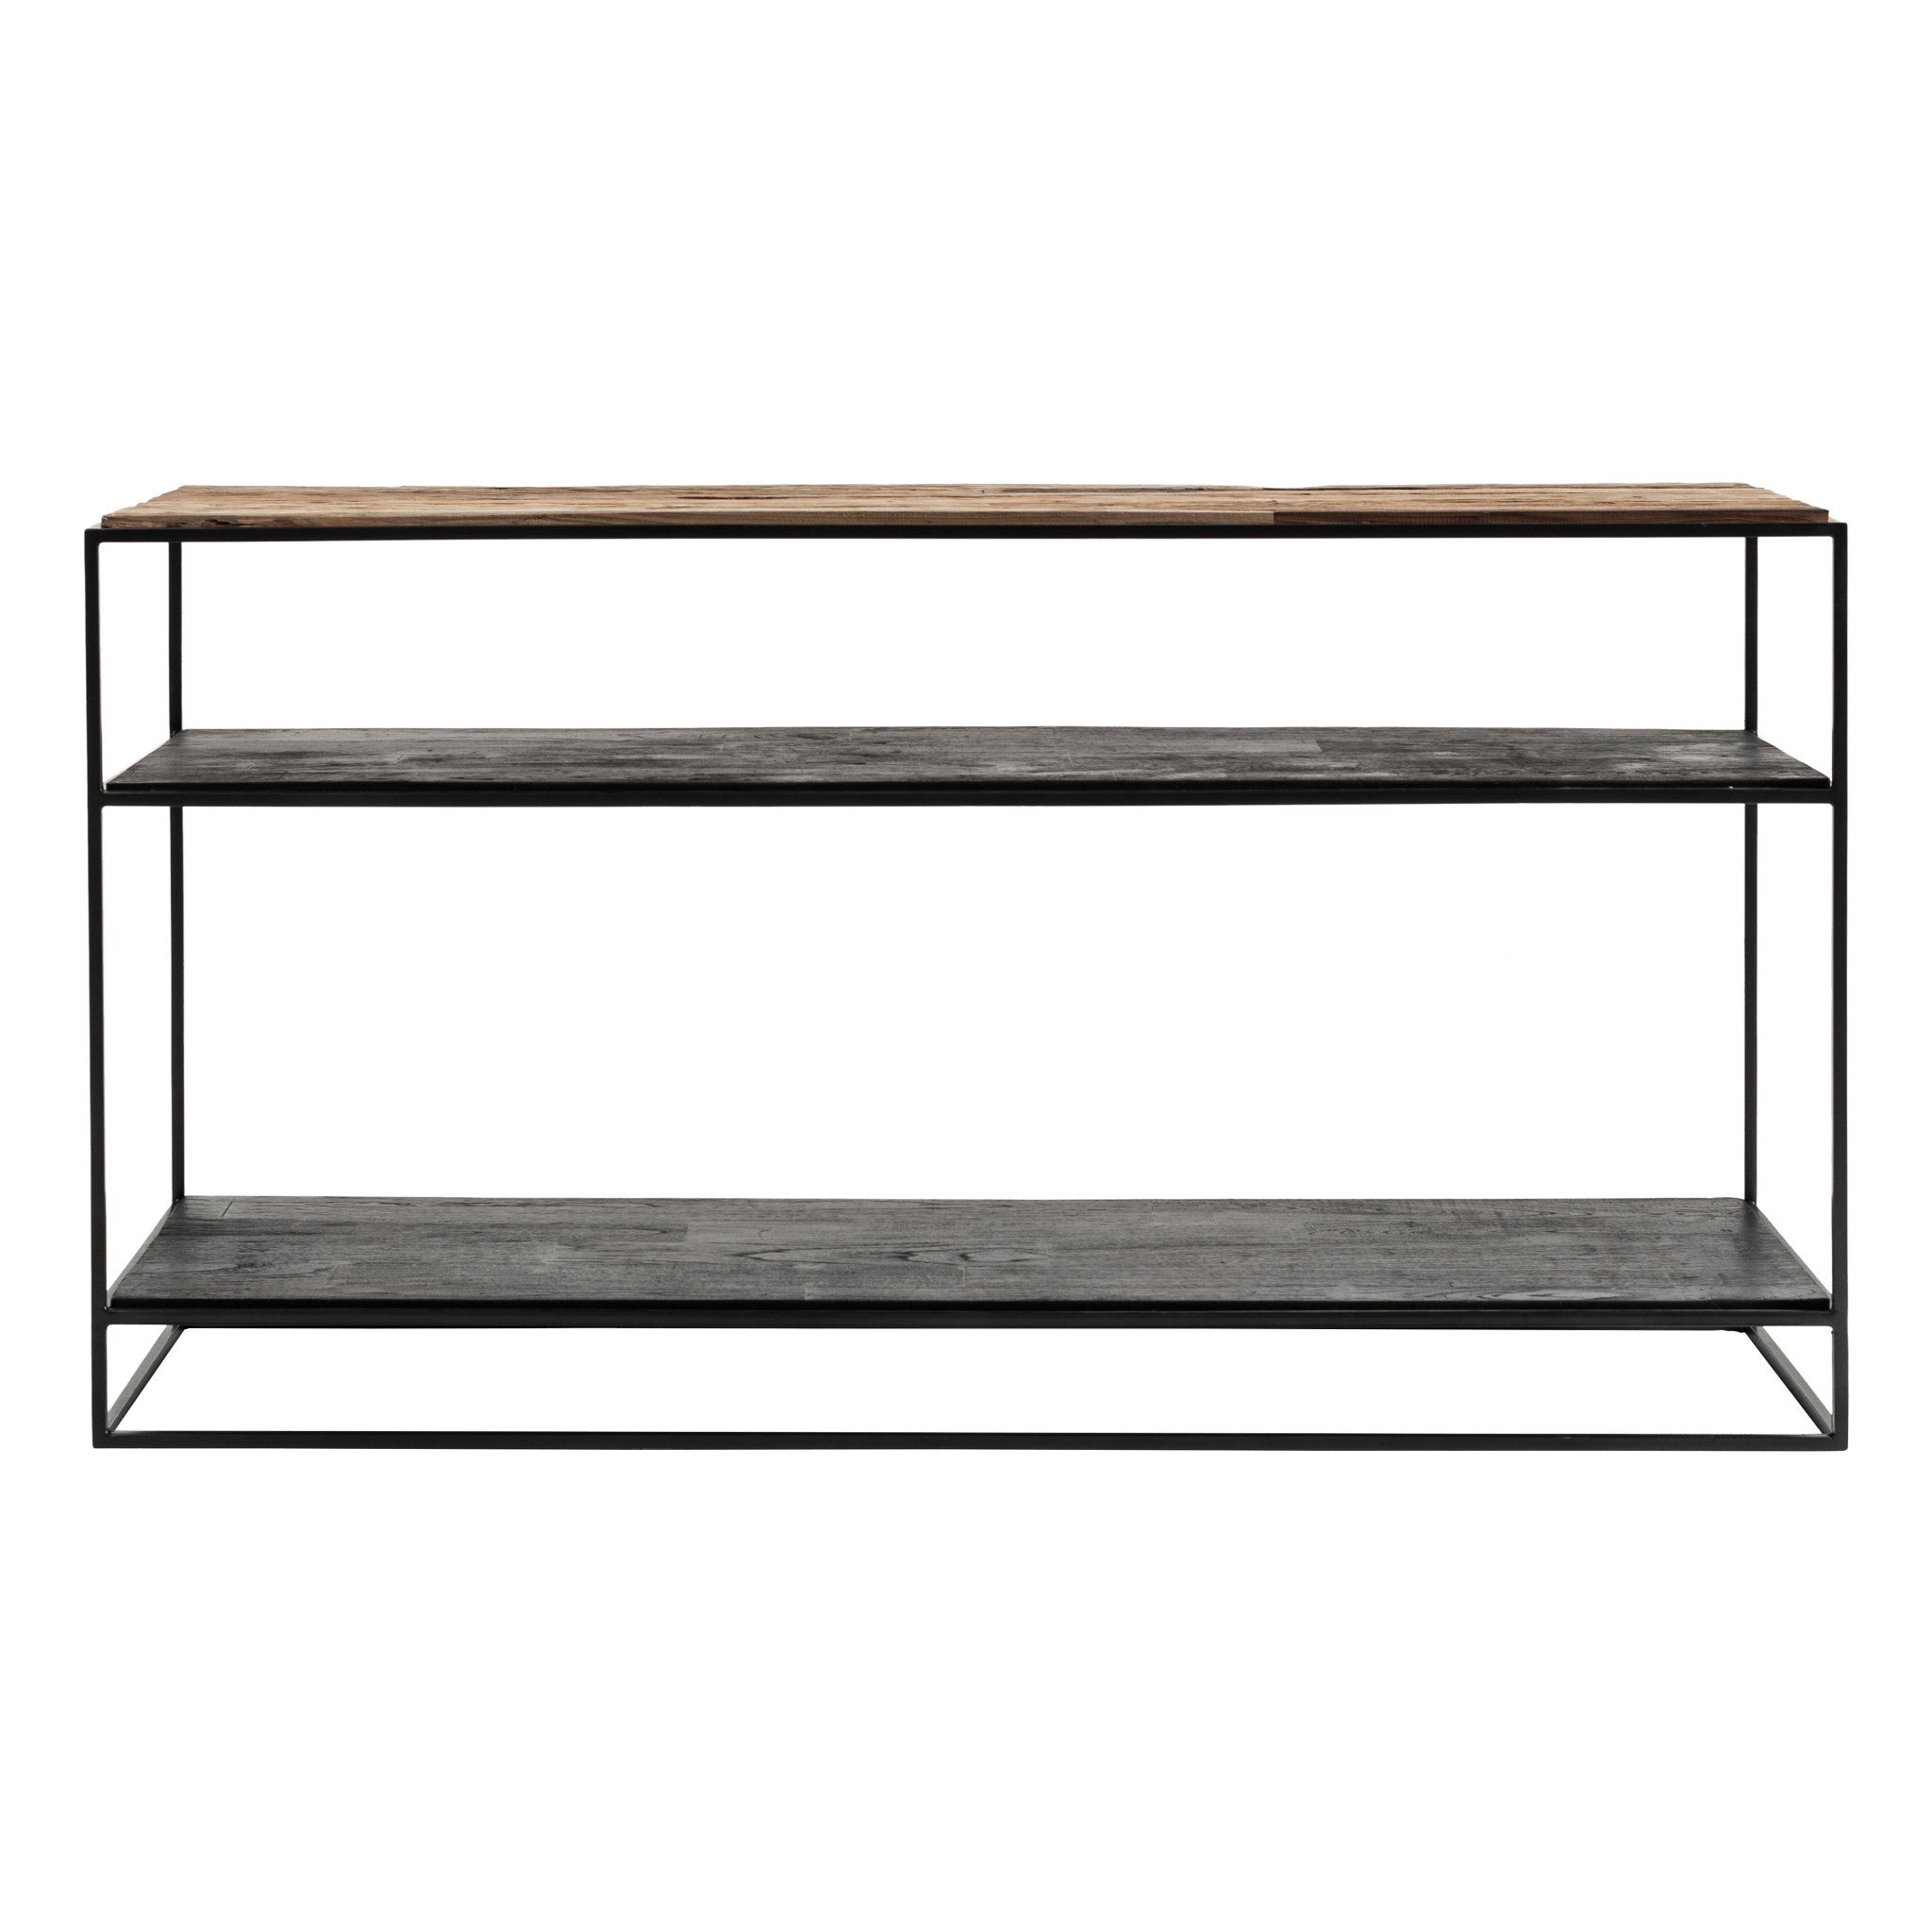 55" Natural and Black Frame Console Table With Storage